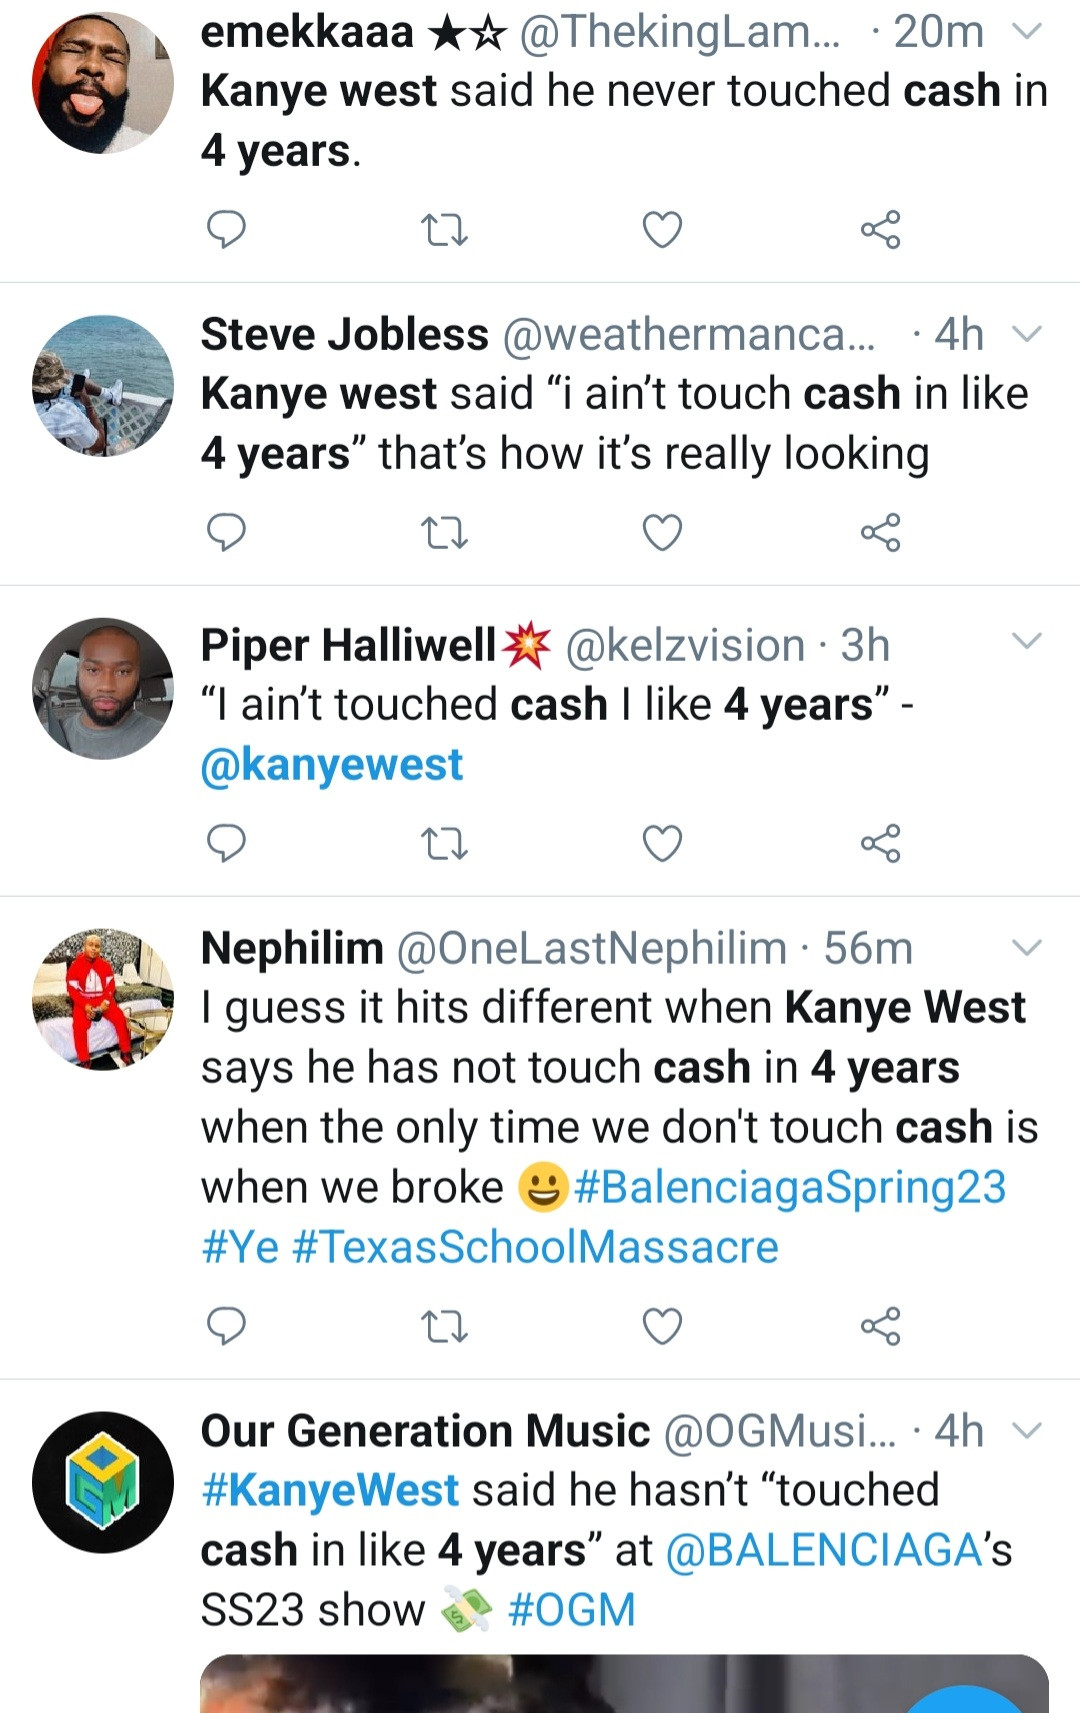 Kanye West says he has not touched cash in 4 years (video)